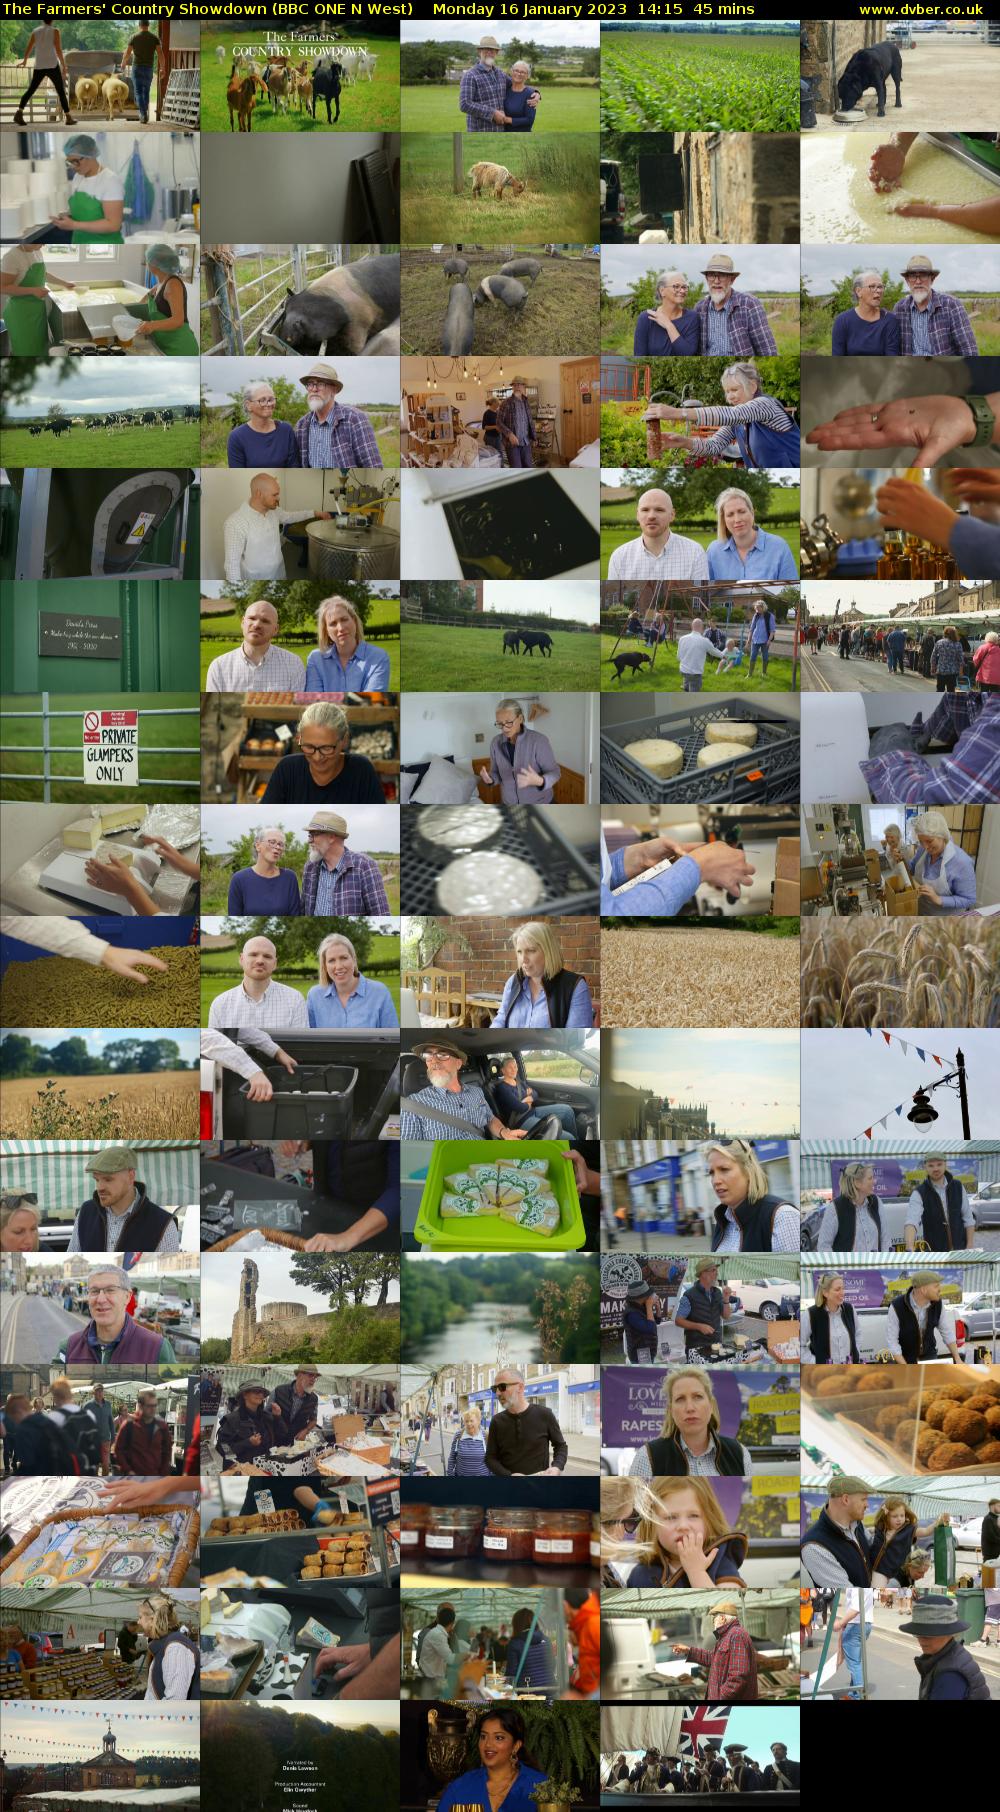 The Farmers' Country Showdown (BBC ONE N West) Monday 16 January 2023 14:15 - 15:00